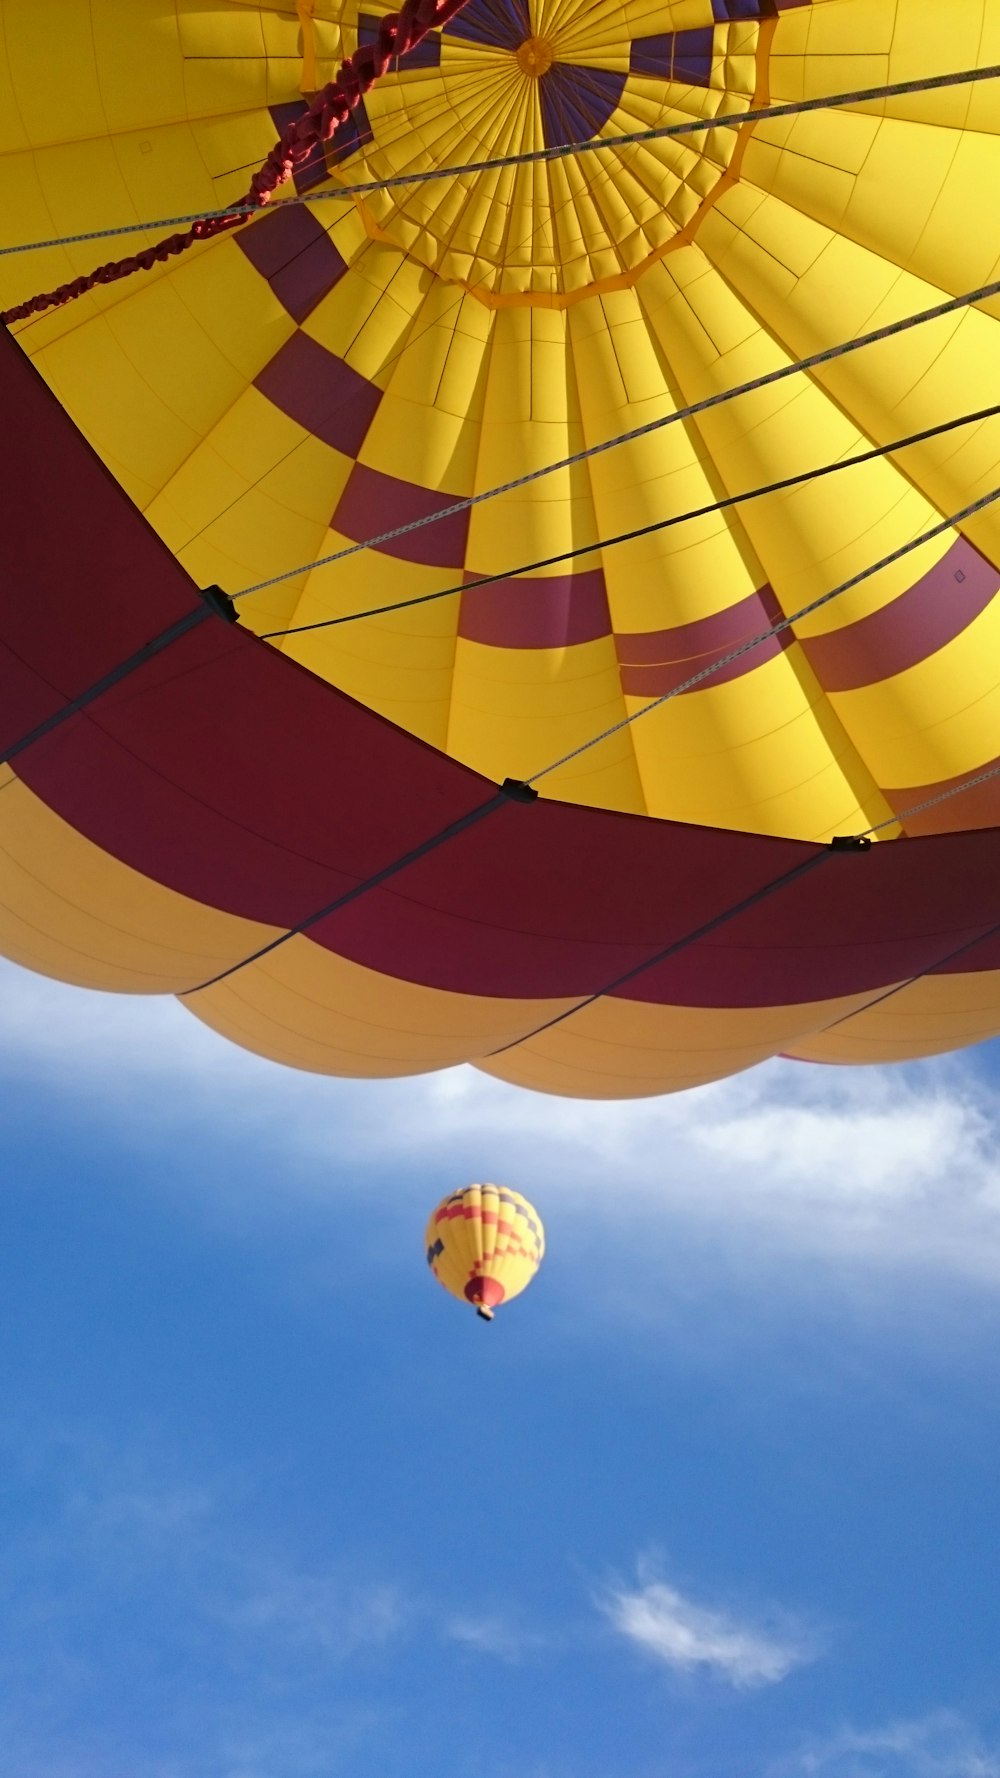 low angle photograph of yellow and red hot air balloon